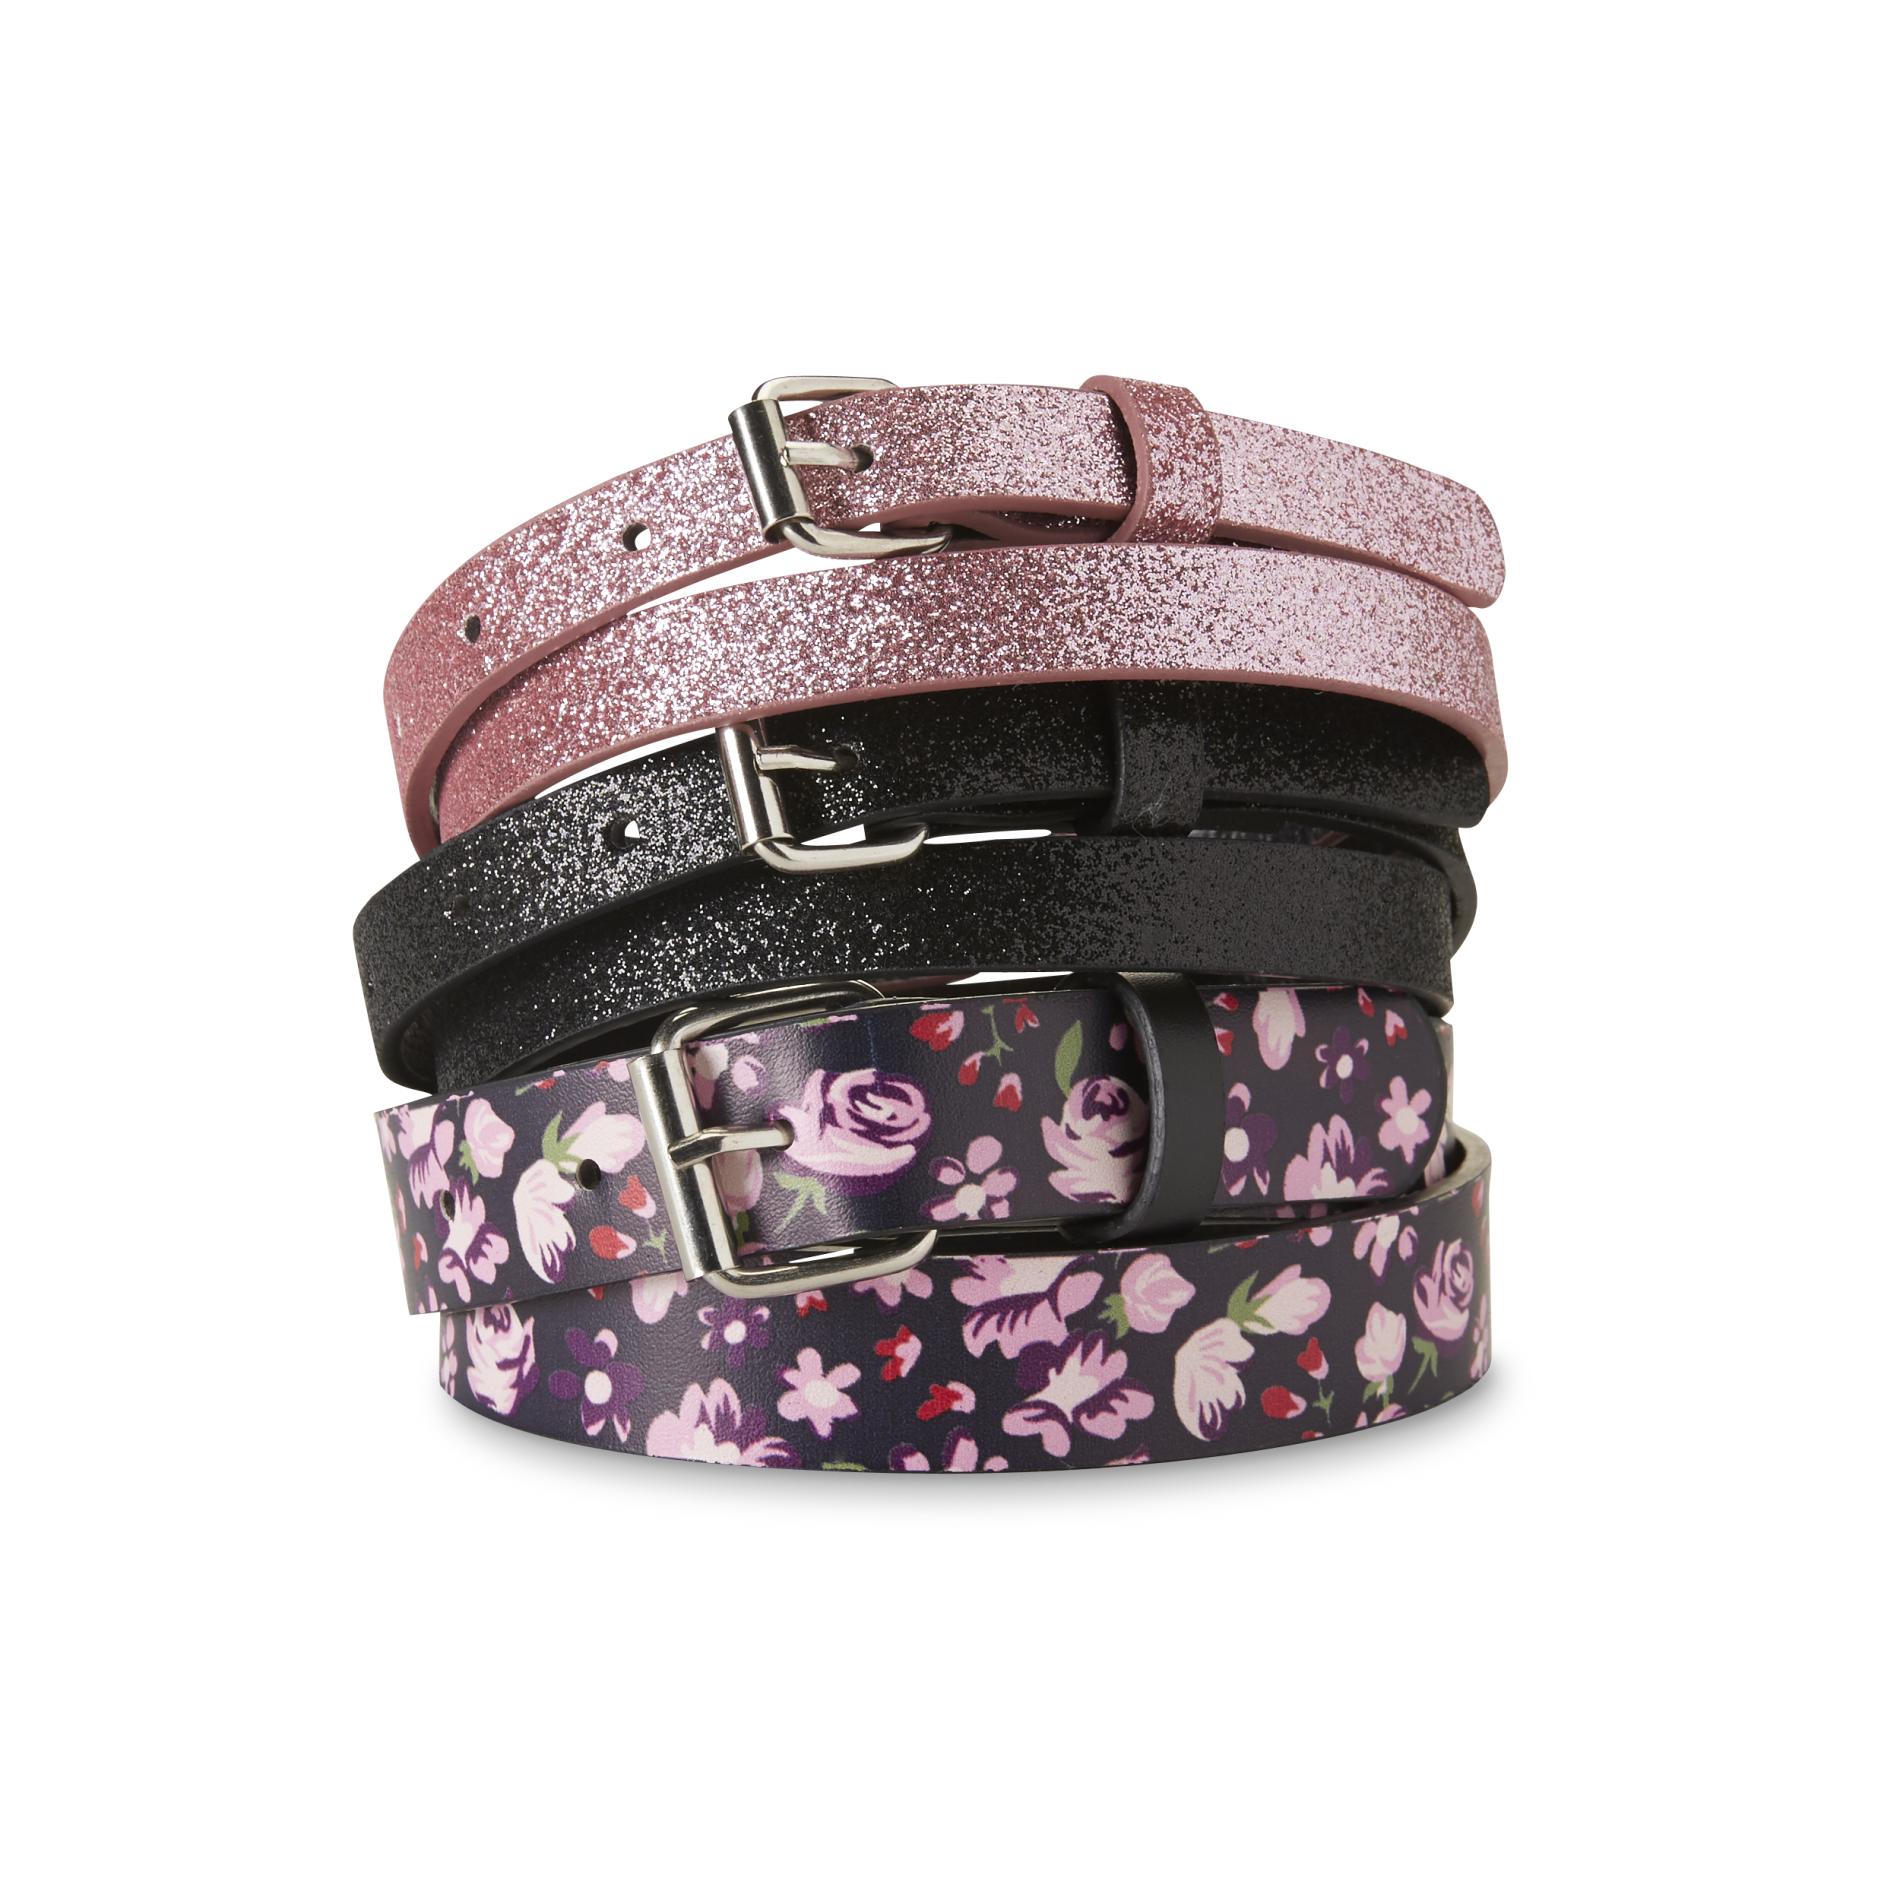 Canyon River Blues Girls' 3-Pack Belts - Floral & Glitter